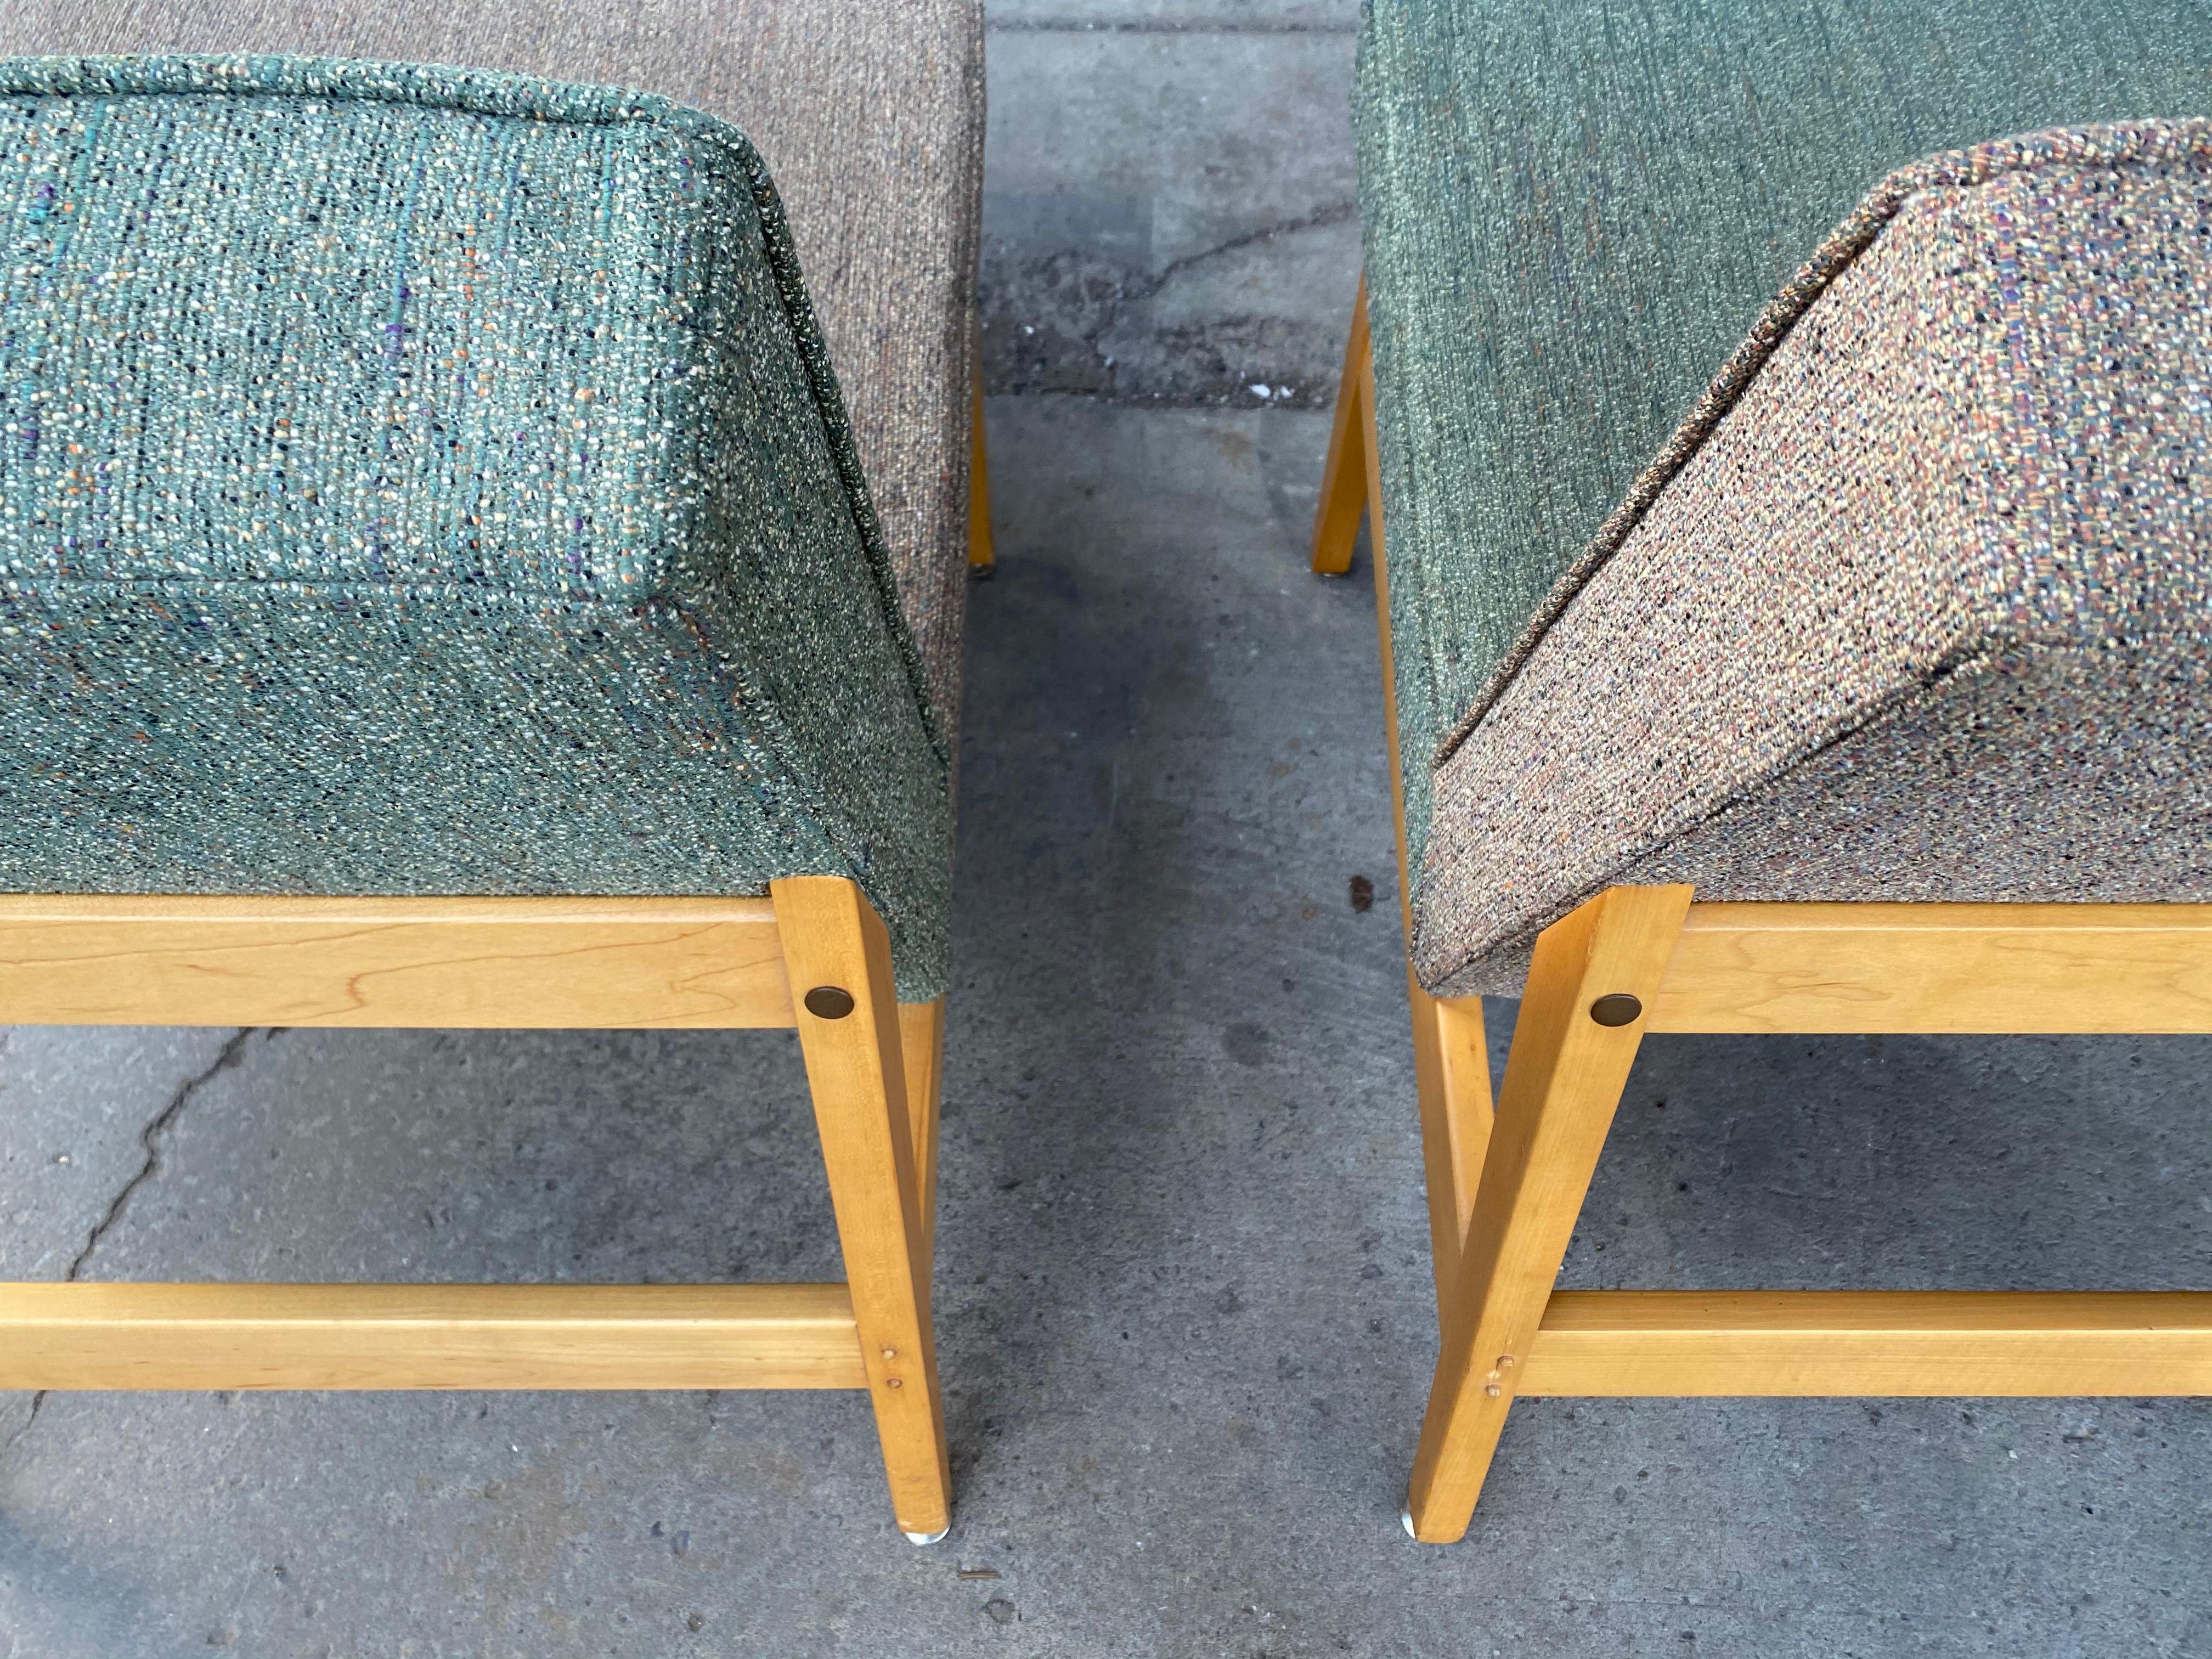 Stunning Pair of Modernist Lounge Chairs Made by Gunlocke, Manner of Jens Risom 1